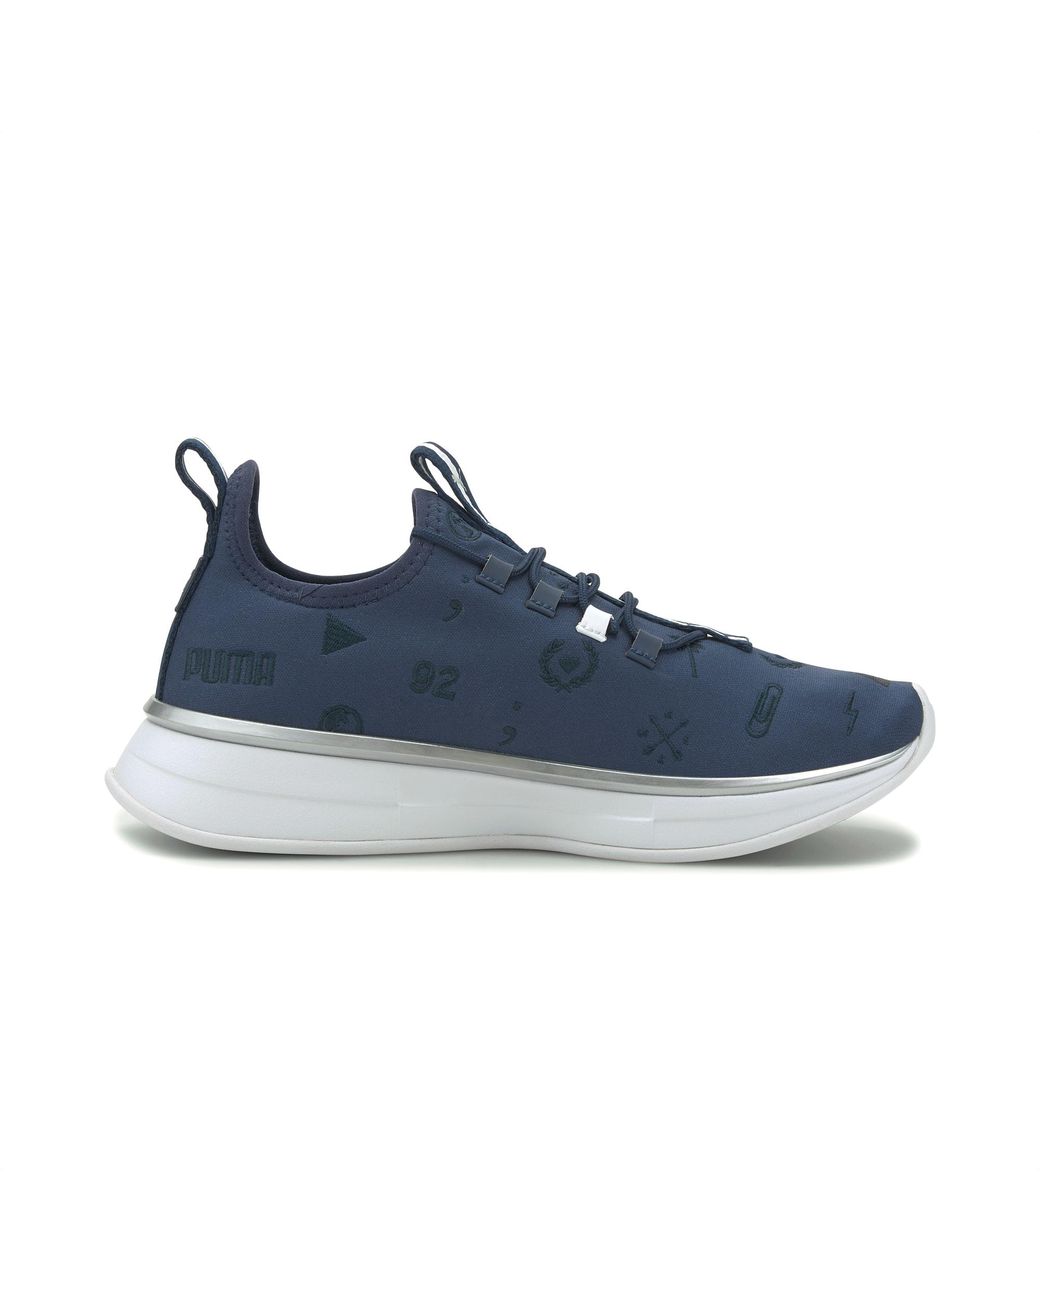 PUMA Rubber Sg Runner Embroidery Training Shoes in Blue - Lyst